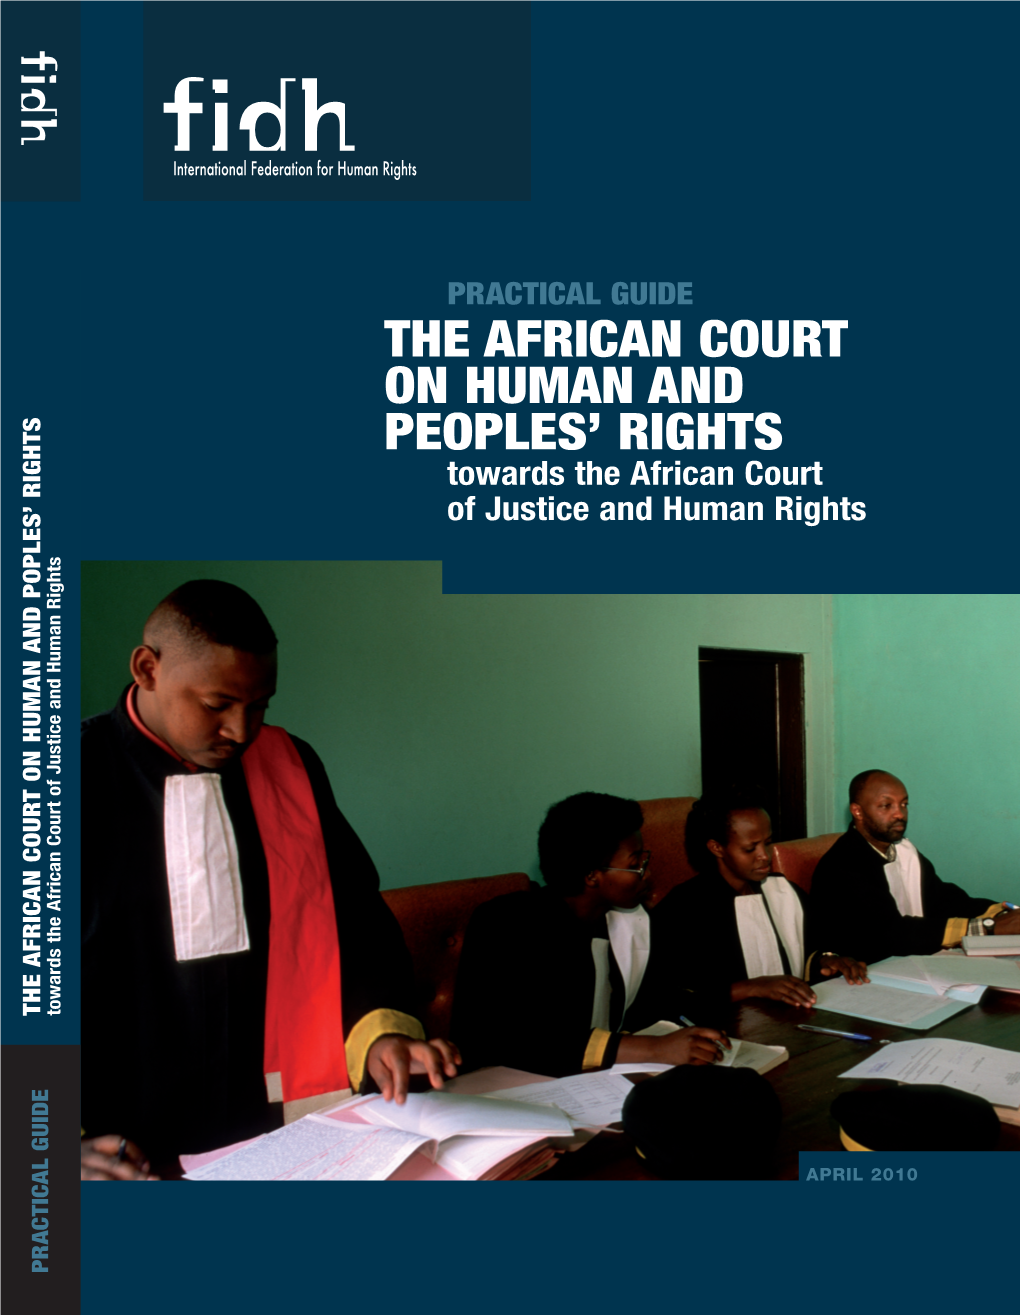 The African Court on Human and Peoples' Rights